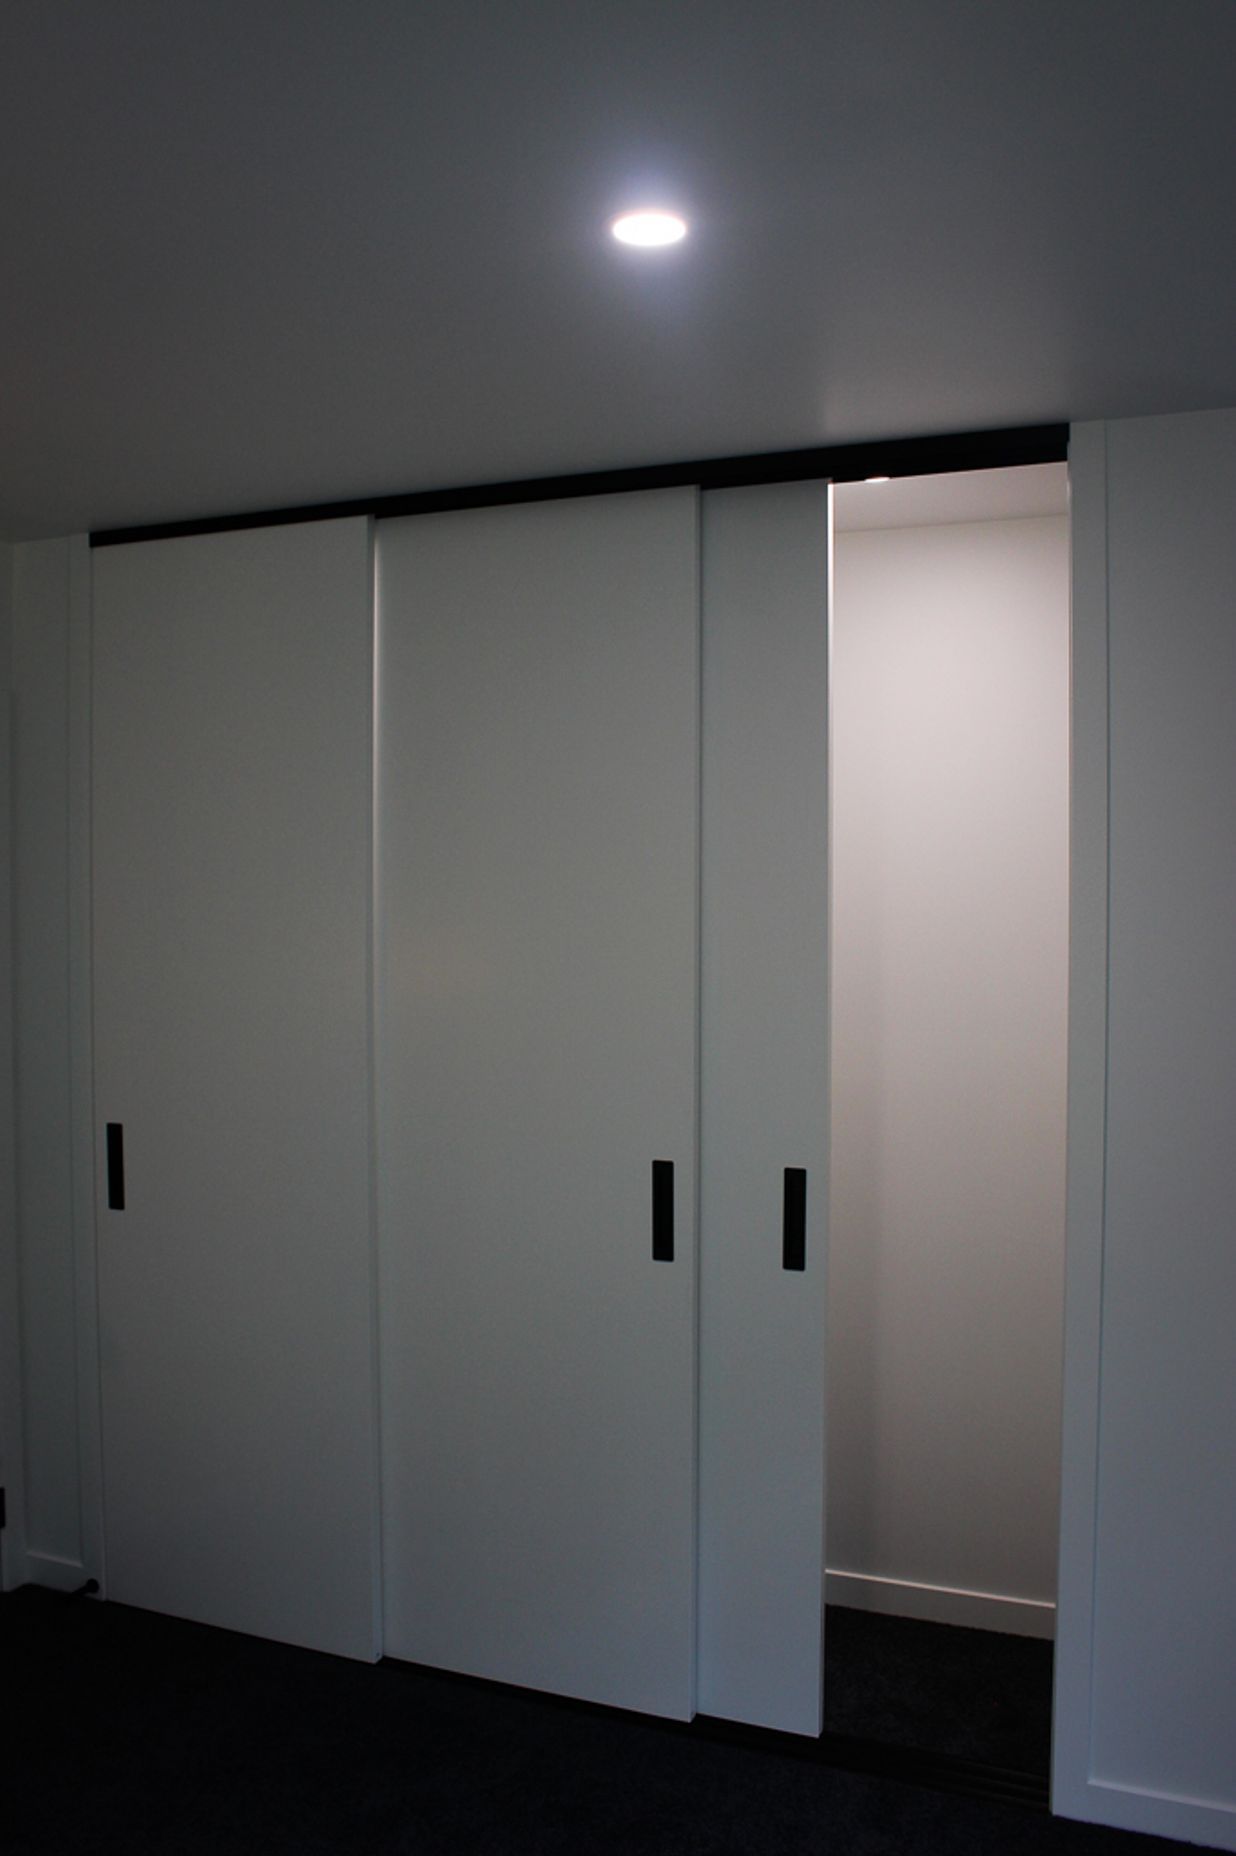 All of the bedrooms have been fitted with full height wardrobes, plenty of room for a busy family and all their hobbies